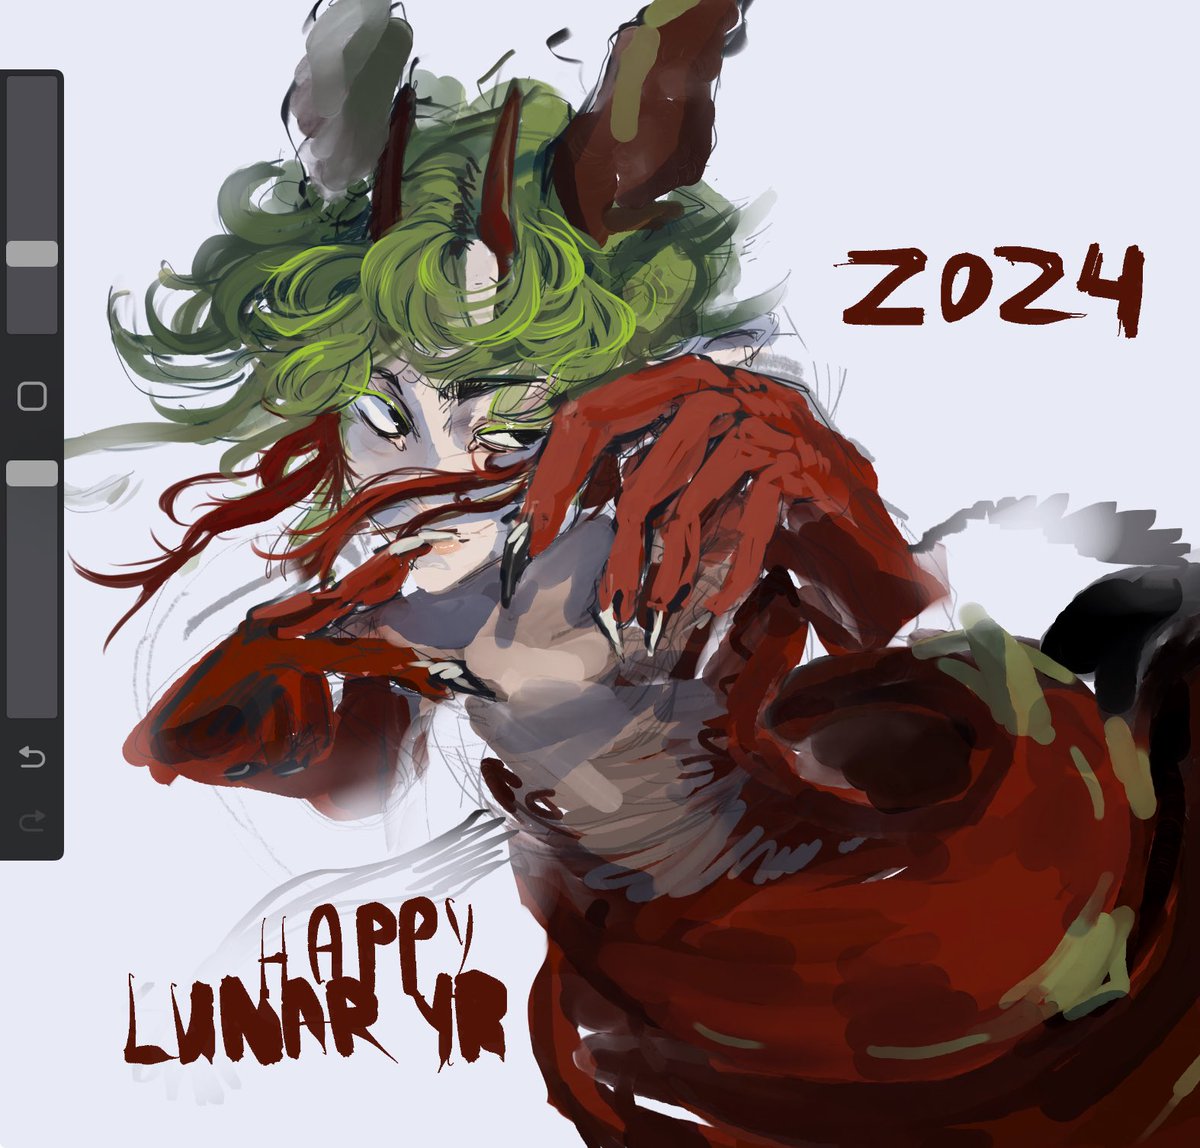 happy lunar year ! #LunarYear 
embrace my messy sketch and have a good time 🧧 
[maybe later i will be able to develop this design, but now i’m too sick ewwww]